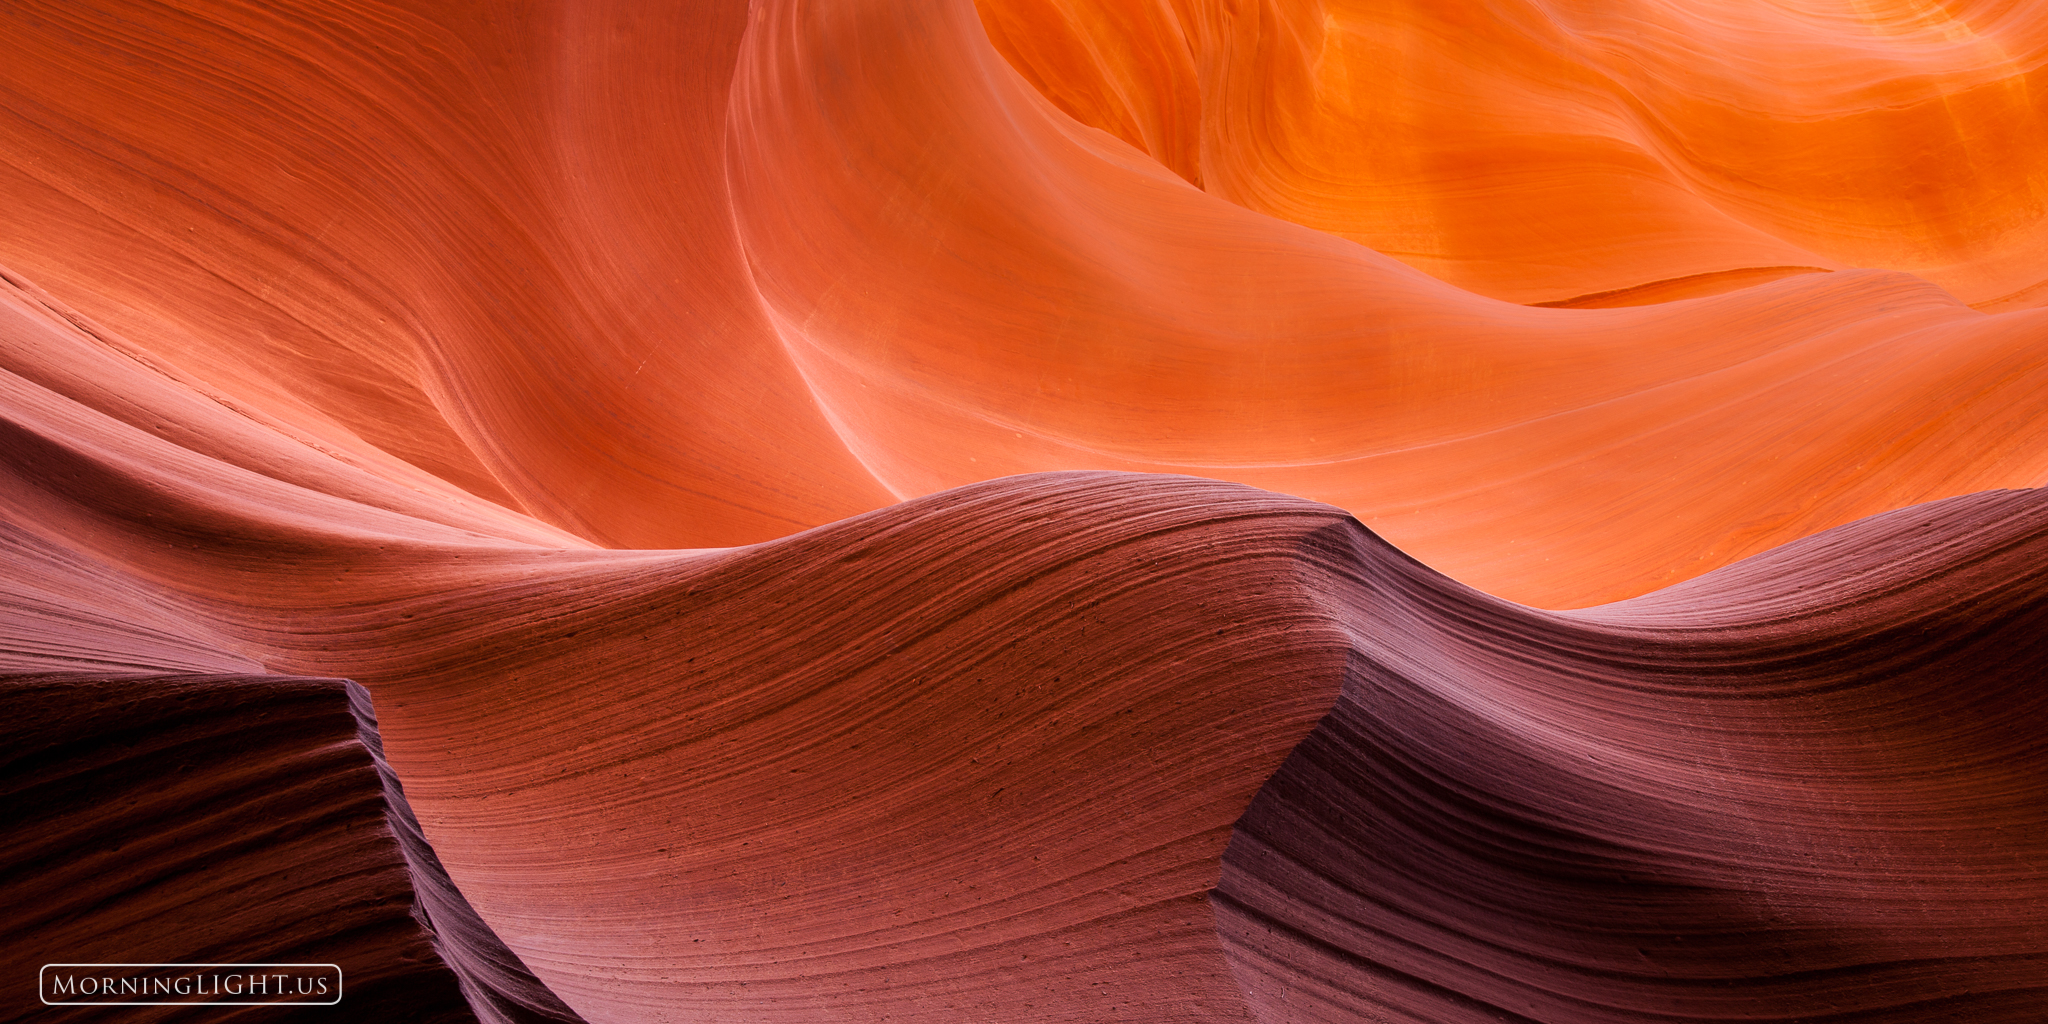 This was my first visit to Antelope Canyon. I've heard everyone talk about it and seen the photos. It is a place filled with...